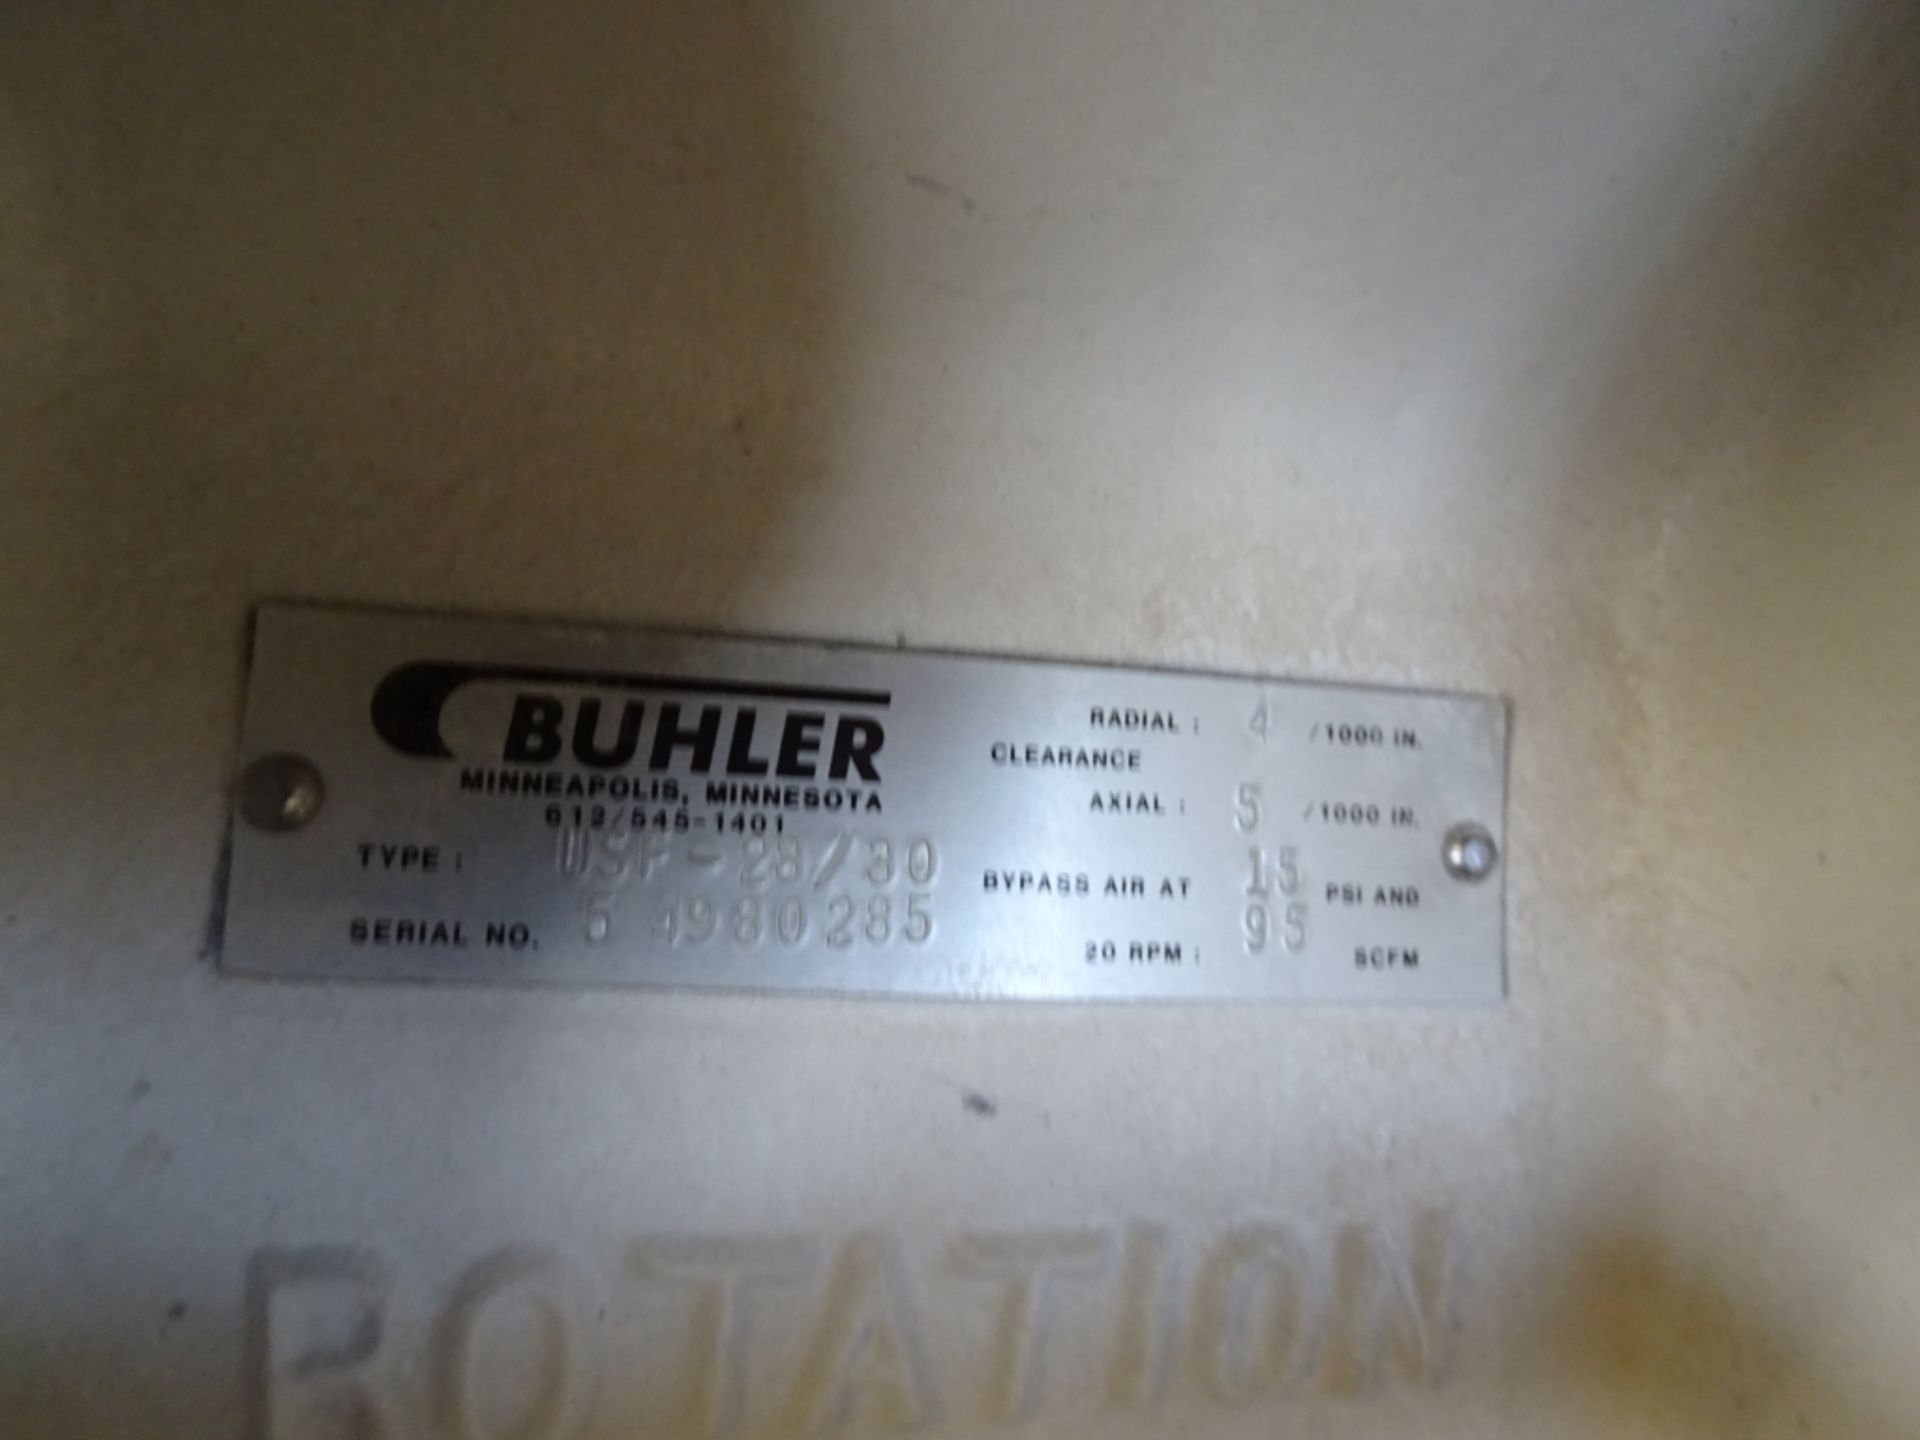 Buhler USF-28/30 Materials Feeder Blower - Image 3 of 3